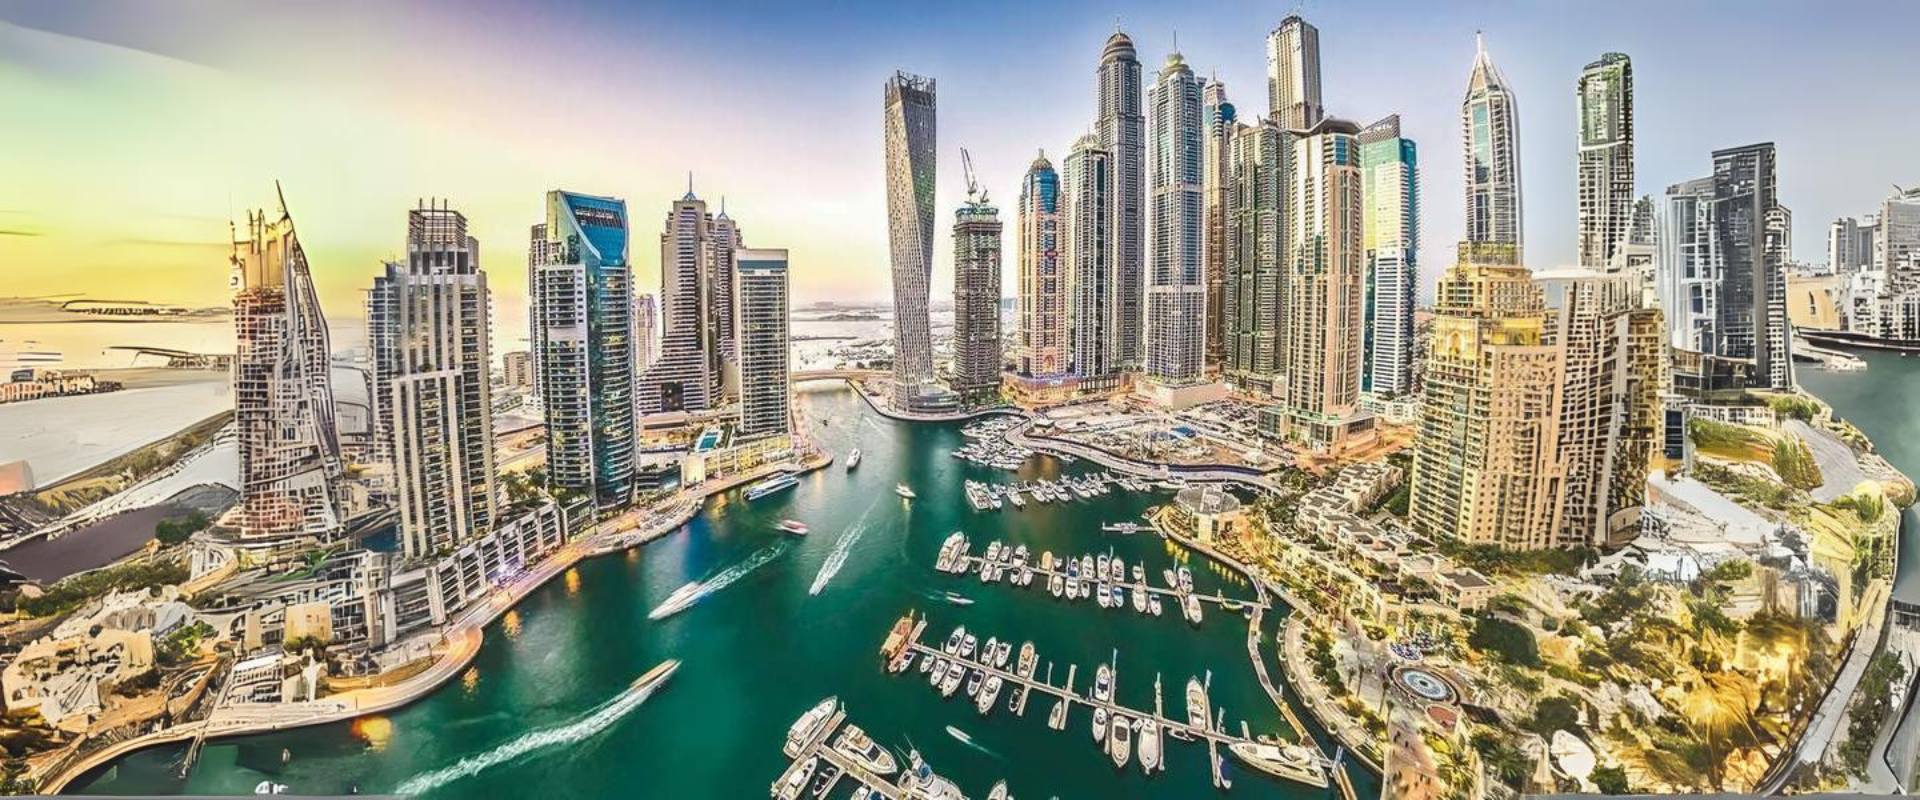 The UAE's real estate yields are expected to remain strong, according to a study